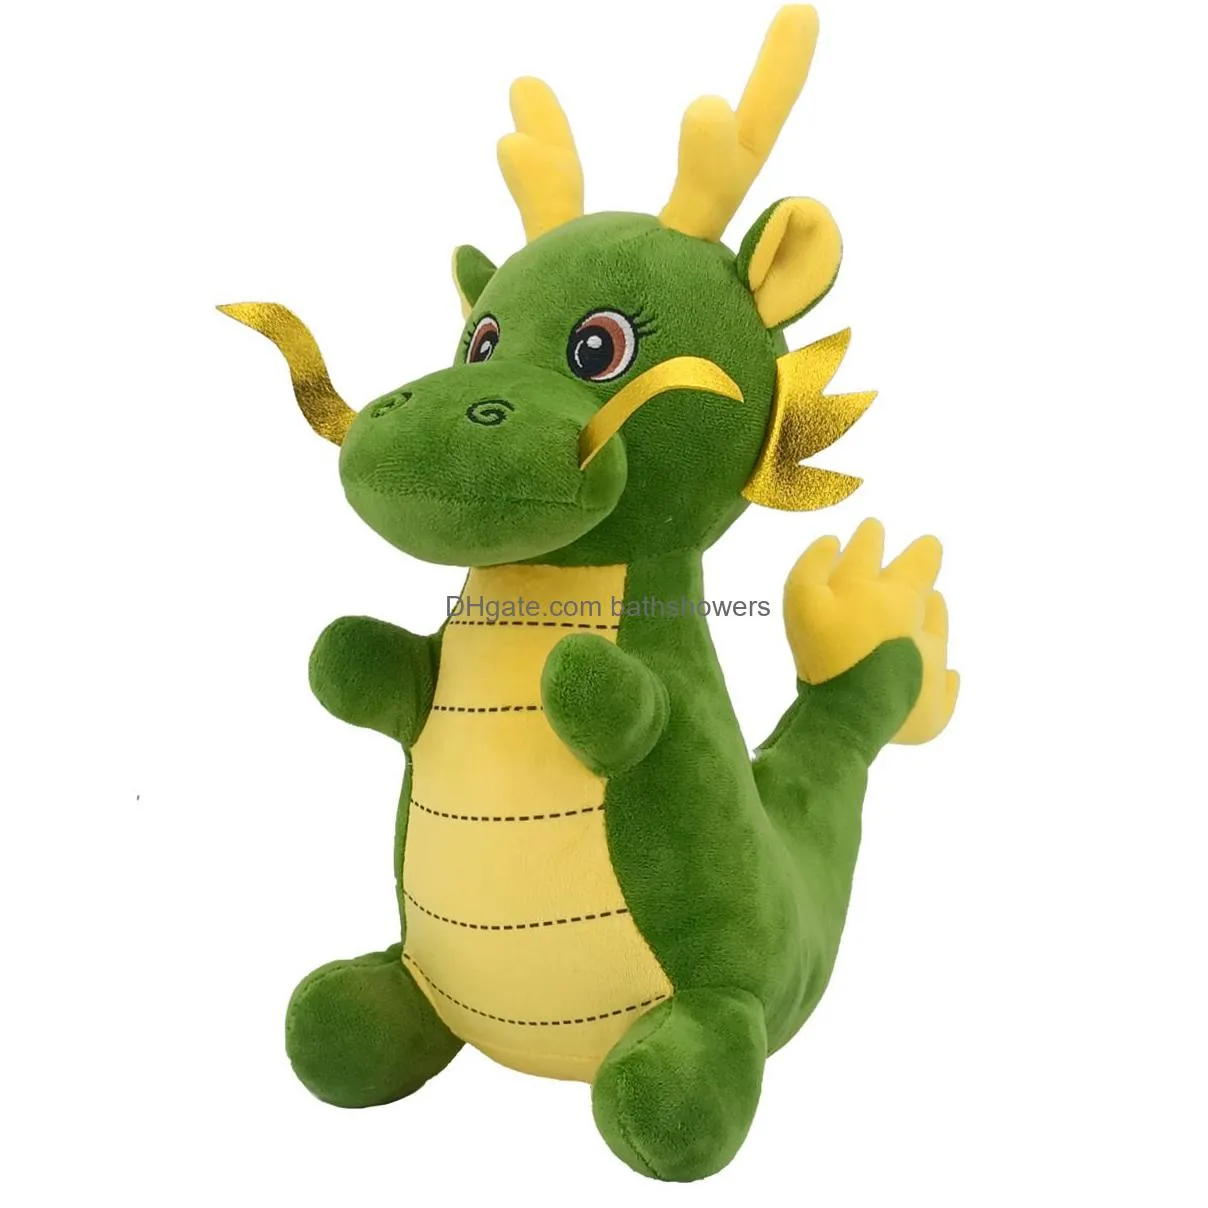 12cm cute dragon plush doll toy cartoon dragons stuffed mascot soft pillow collection cosplay birthday gift for kids